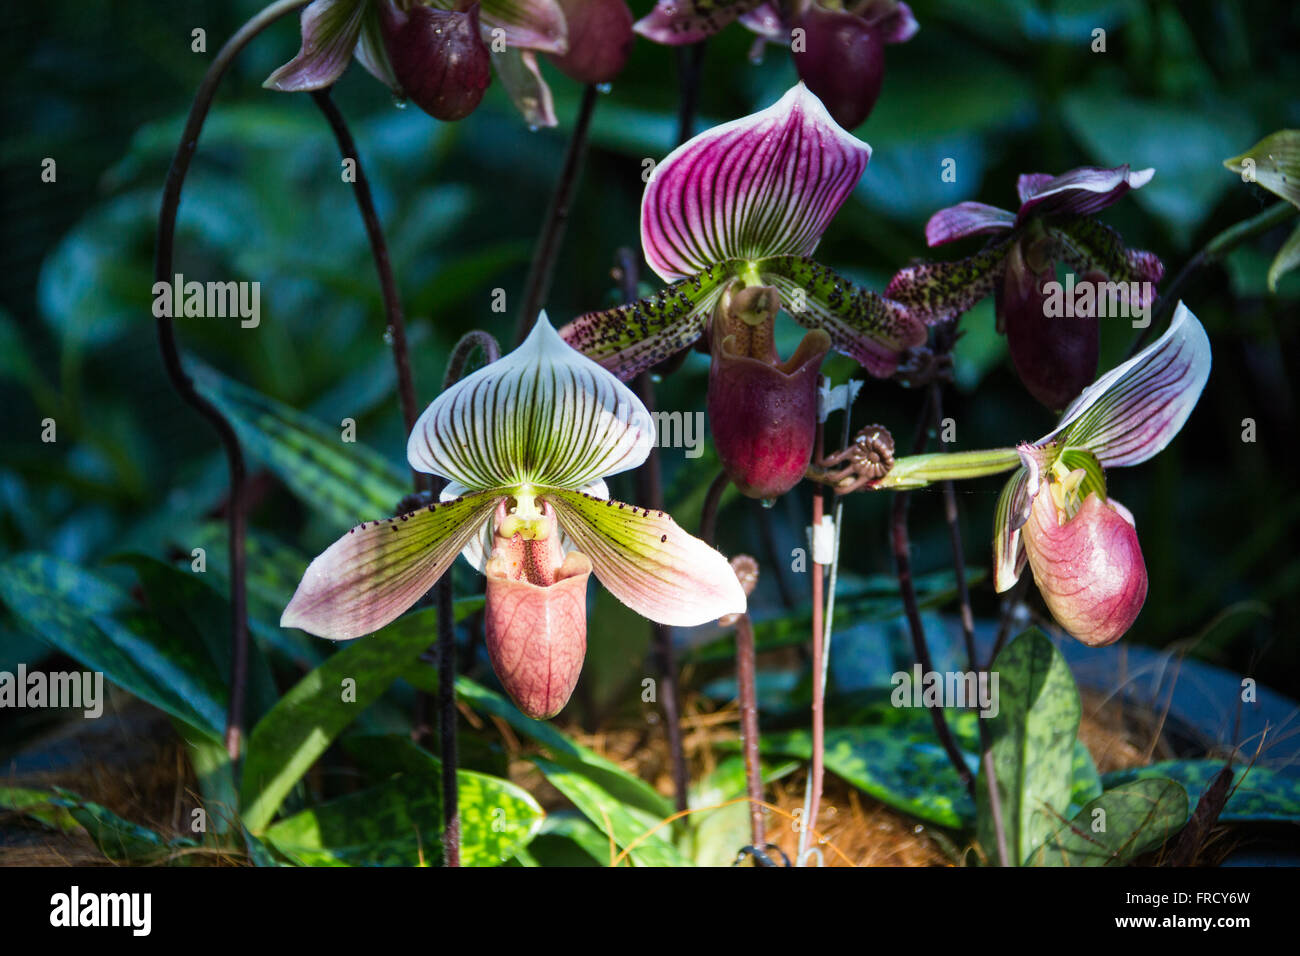 Lady Slipper Orchids in the orchid garden, Singapore Botanic Gardens Stock Photo